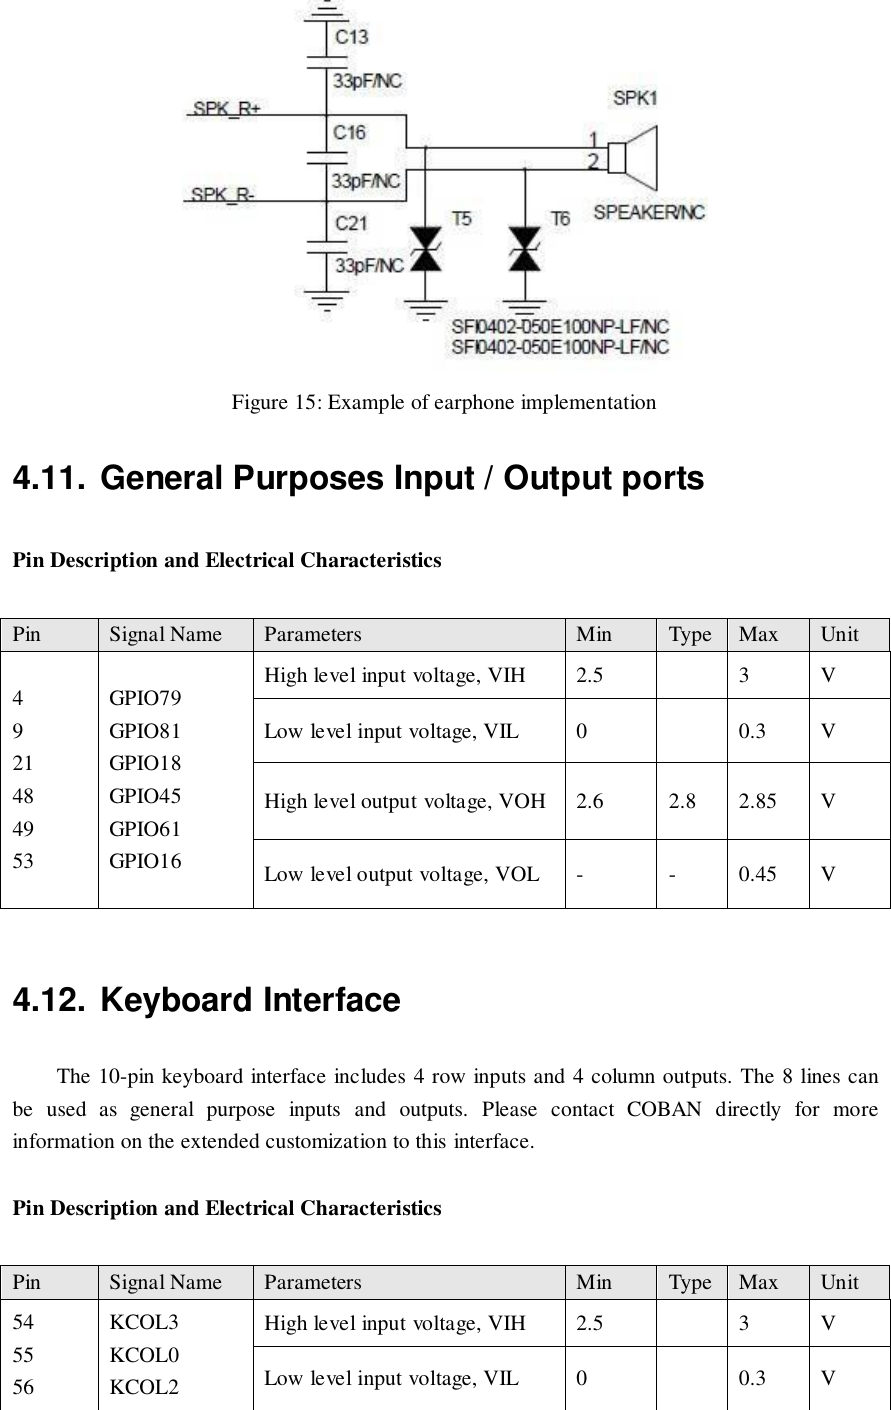  Figure 15: Example of earphone implementation 4.11. General Purposes Input / Output ports Pin Description and Electrical Characteristics  4.12. Keyboard Interface The 10-pin keyboard interface includes 4 row inputs and 4 column outputs. The 8 lines can be  used  as  general  purpose  inputs  and  outputs.  Please  contact  COBAN  directly  for  more information on the extended customization to this interface. Pin Description and Electrical Characteristics Pin Signal Name Parameters Min Type Max Unit 4 9 21 48 49 53 GPIO79 GPIO81 GPIO18 GPIO45 GPIO61 GPIO16 High level input voltage, VIH 2.5  3 V Low level input voltage, VIL 0  0.3 V High level output voltage, VOH 2.6 2.8 2.85 V Low level output voltage, VOL - - 0.45 V Pin Signal Name Parameters Min Type Max Unit 54 55 56 KCOL3 KCOL0 KCOL2 High level input voltage, VIH 2.5  3 V Low level input voltage, VIL 0  0.3 V 